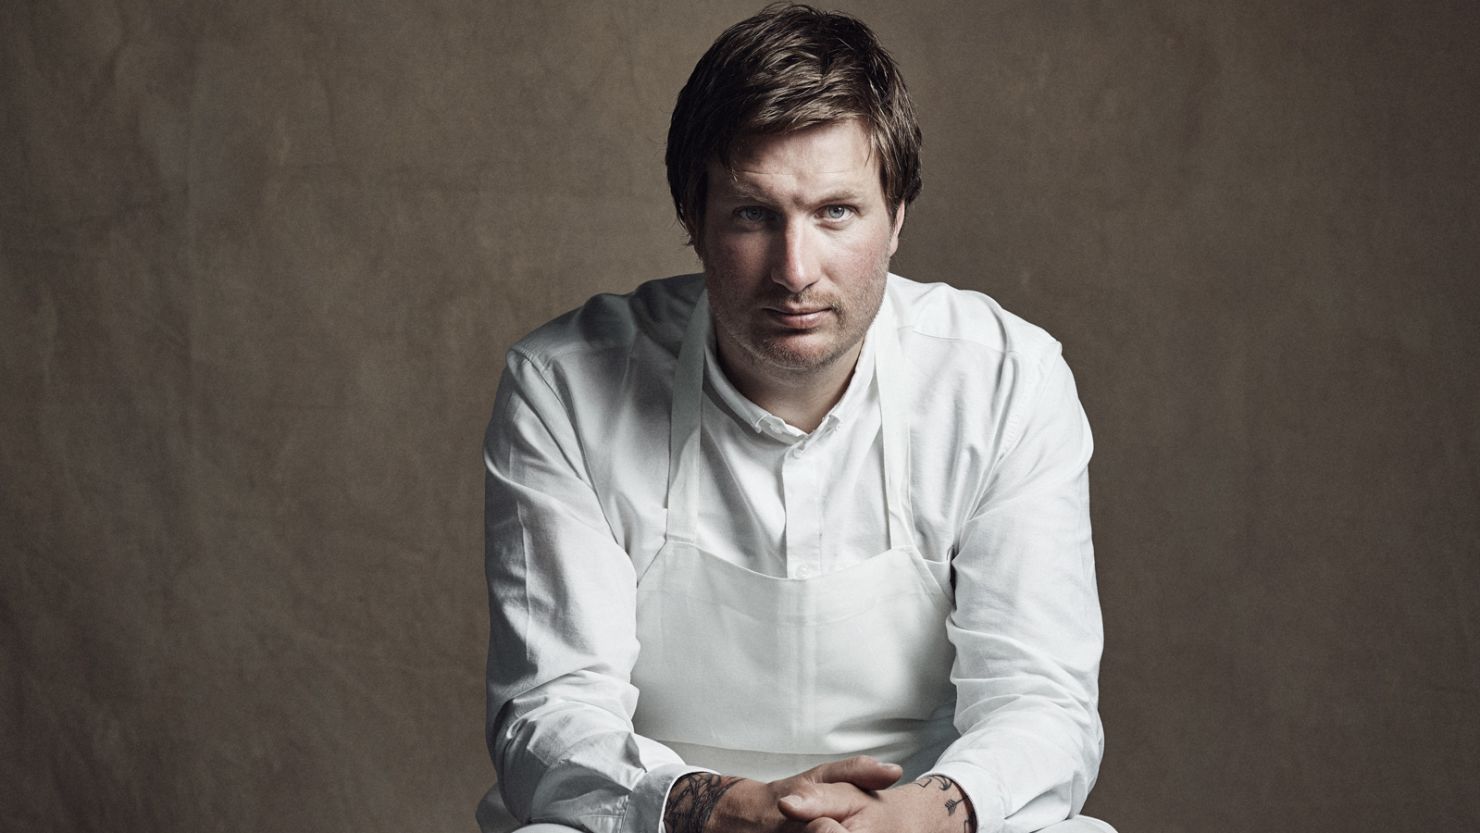 Esben Holmboe Bang, head chef and co-owner of Maaemo, the three-Michelin-starred restaurant in Oslo, Norway